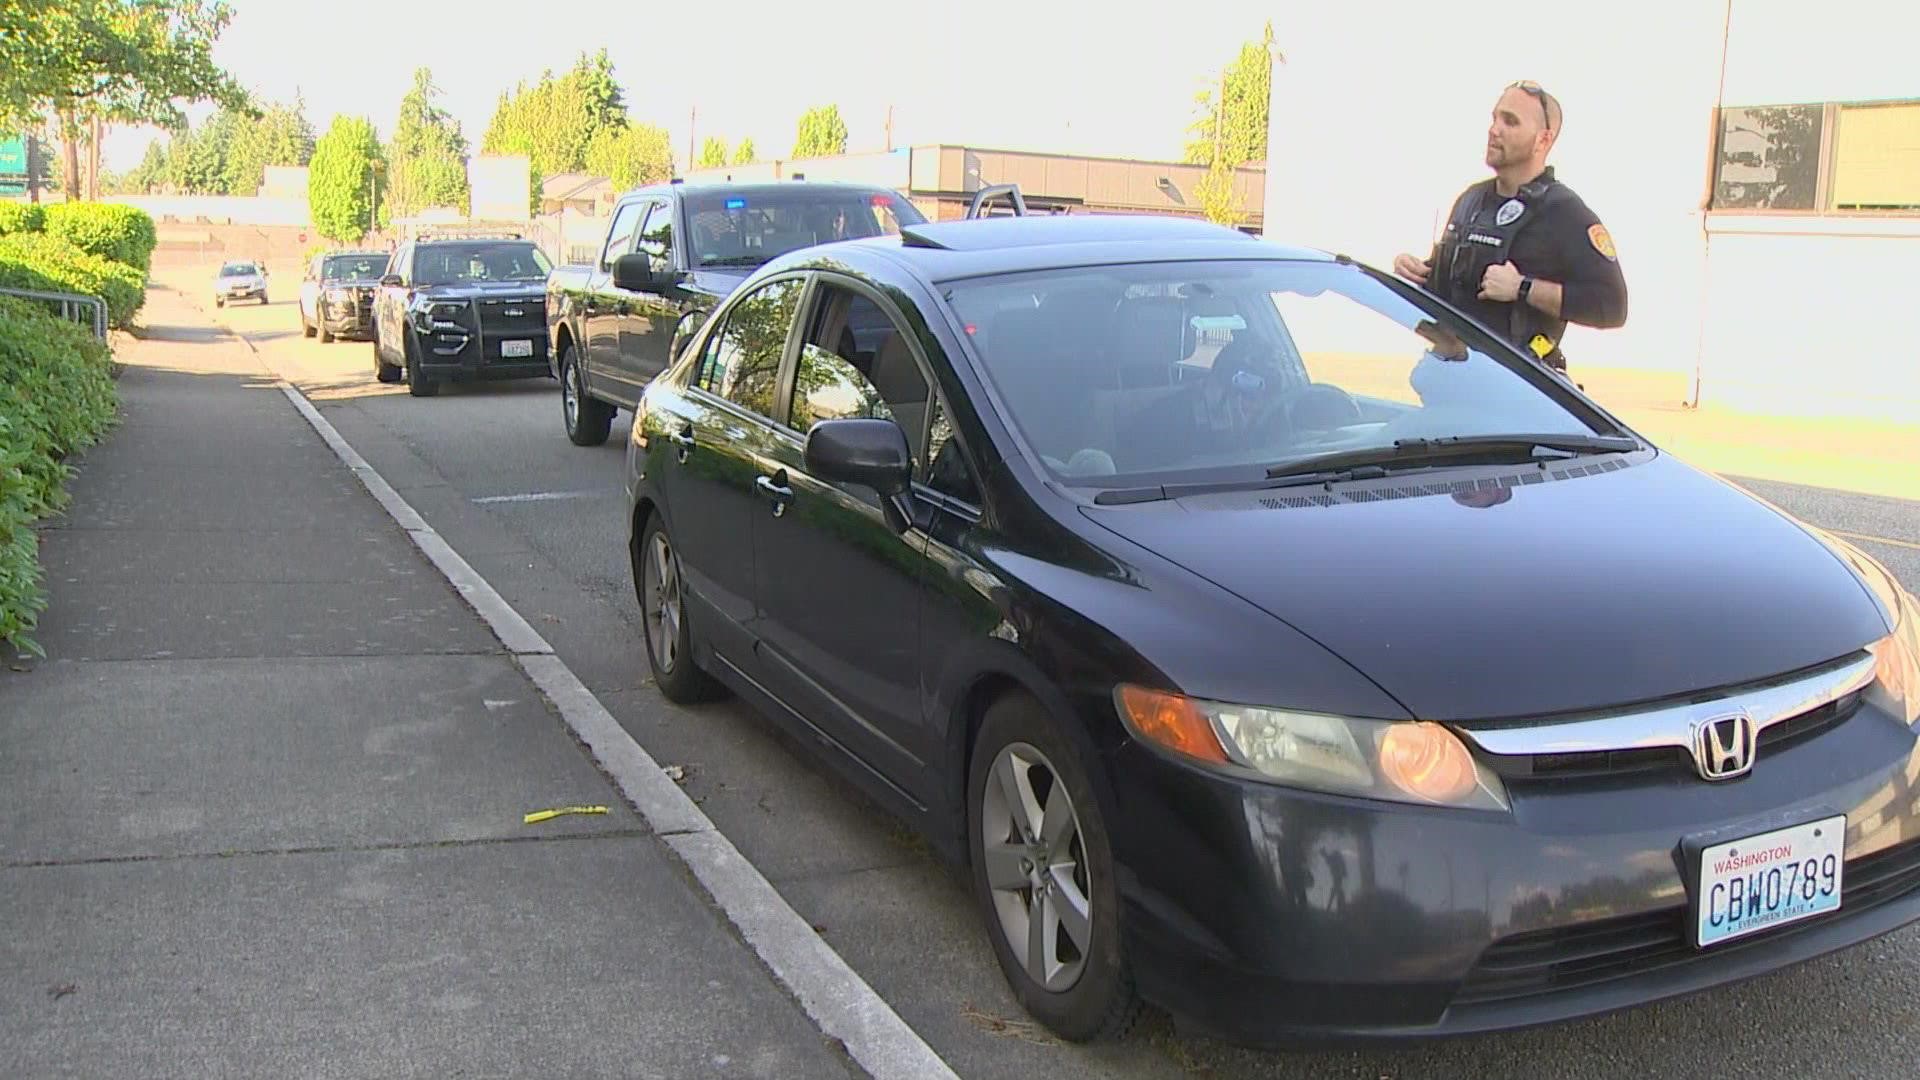 A child that was inside a vehicle when it was stolen in Everett was found safe Monday afternoon.